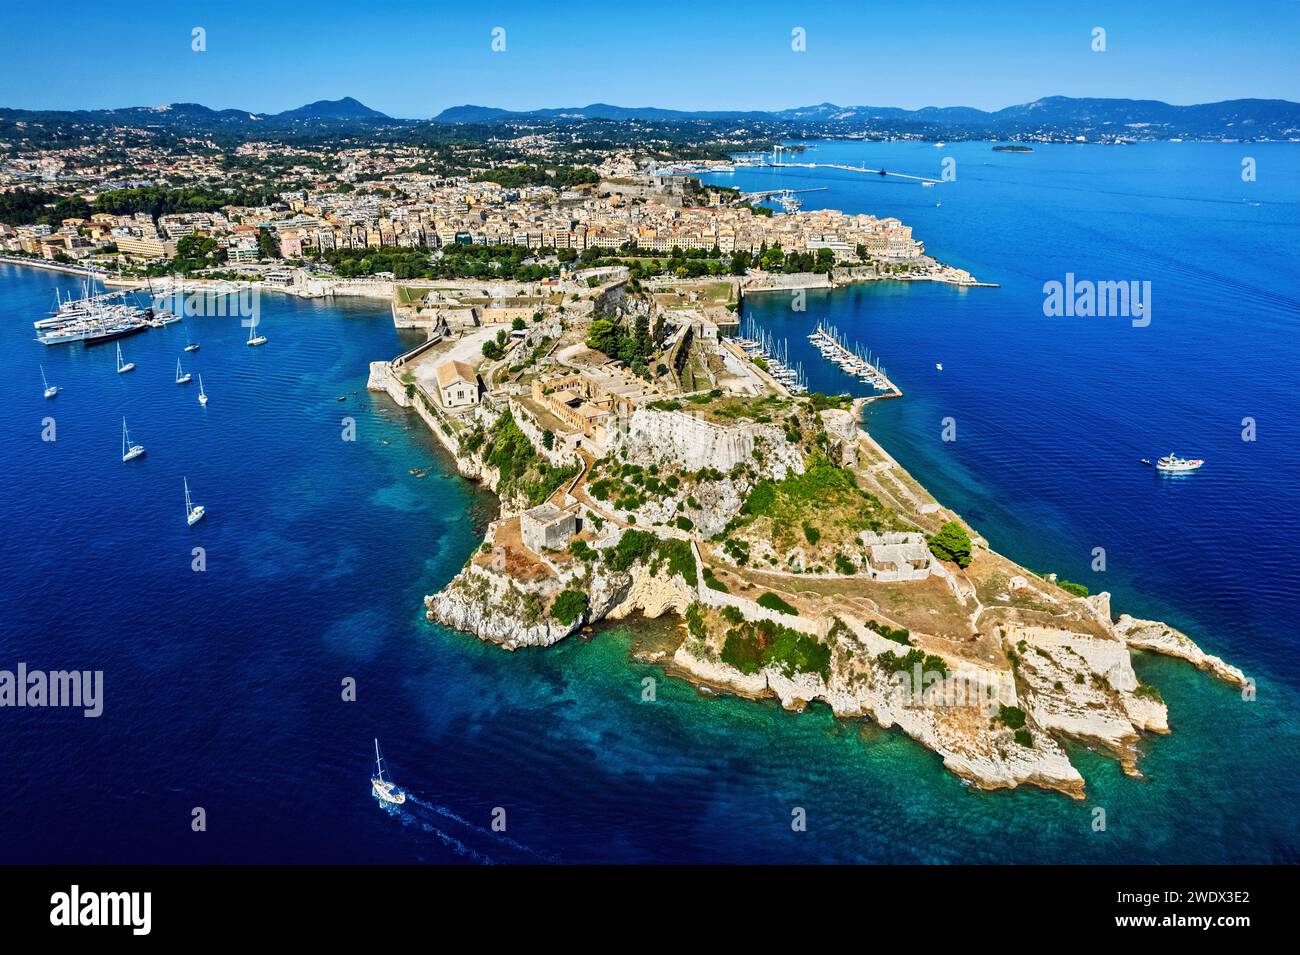 Aerial view of the Old Fortress and the old town of Corfu ('Kerkyra'), Ionian islands, Greece. Stock Photo